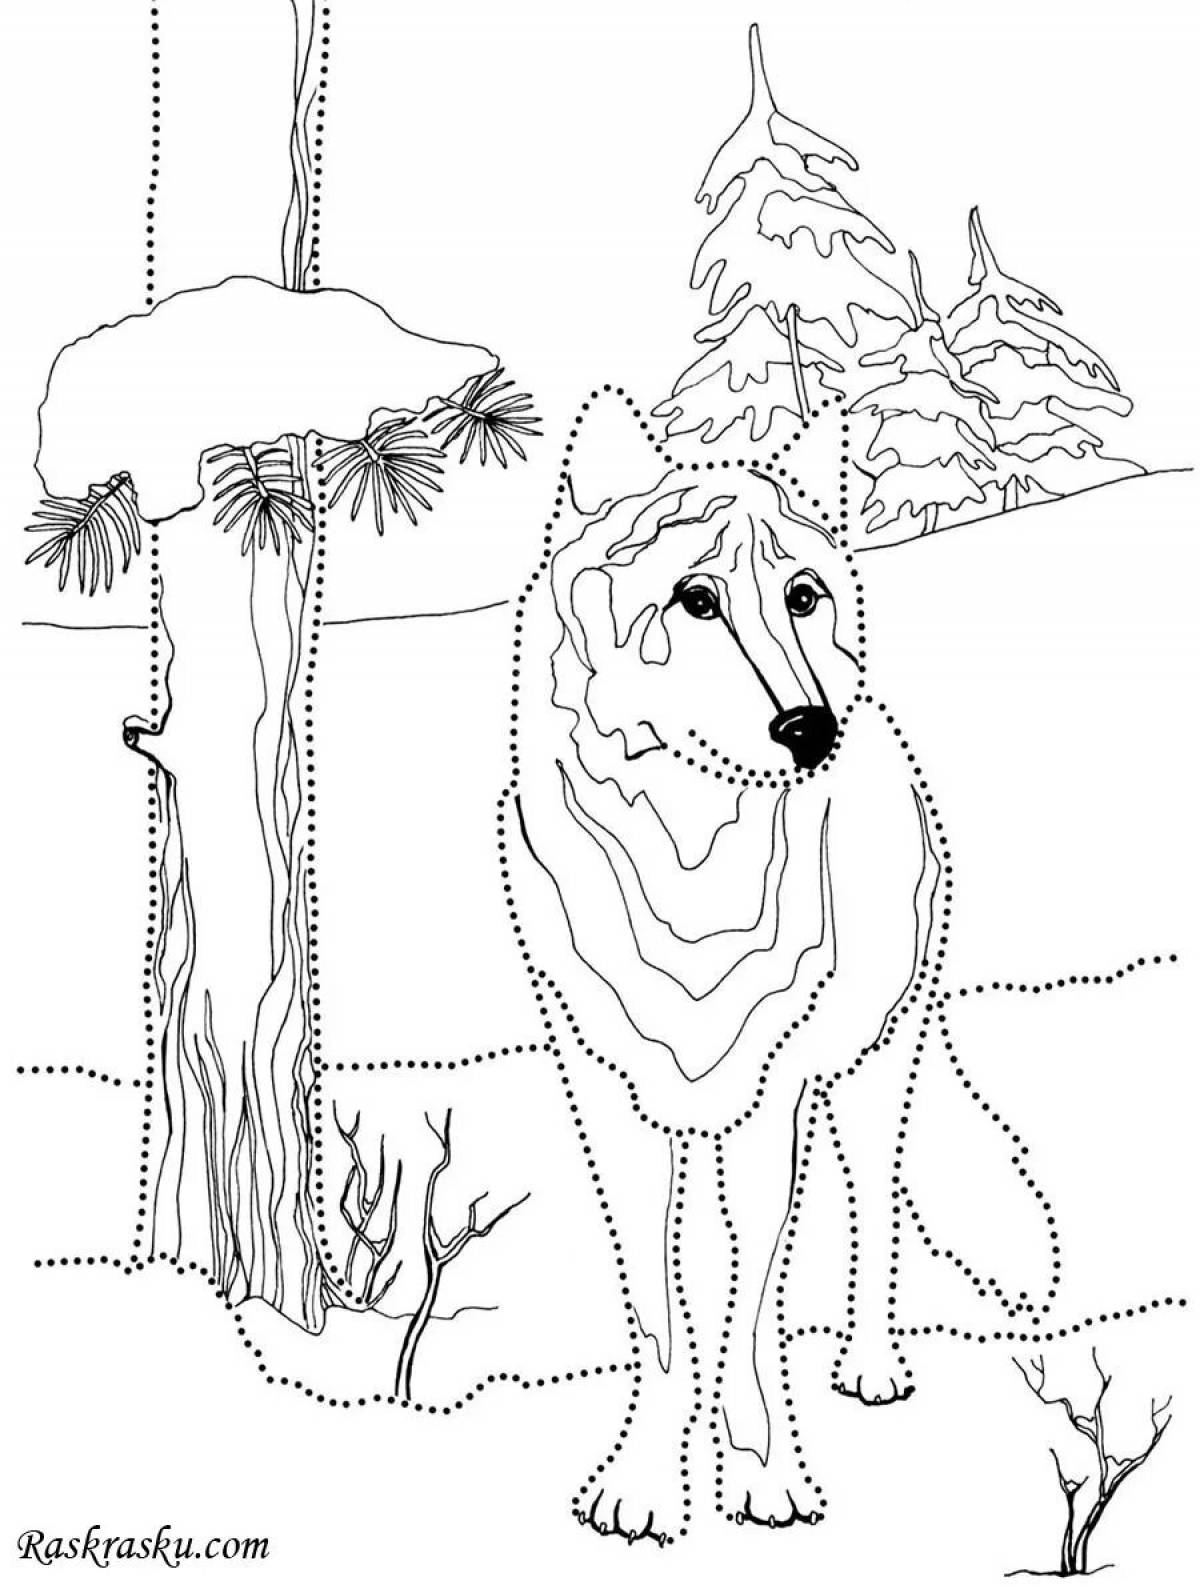 Howling black winter wolf coloring page